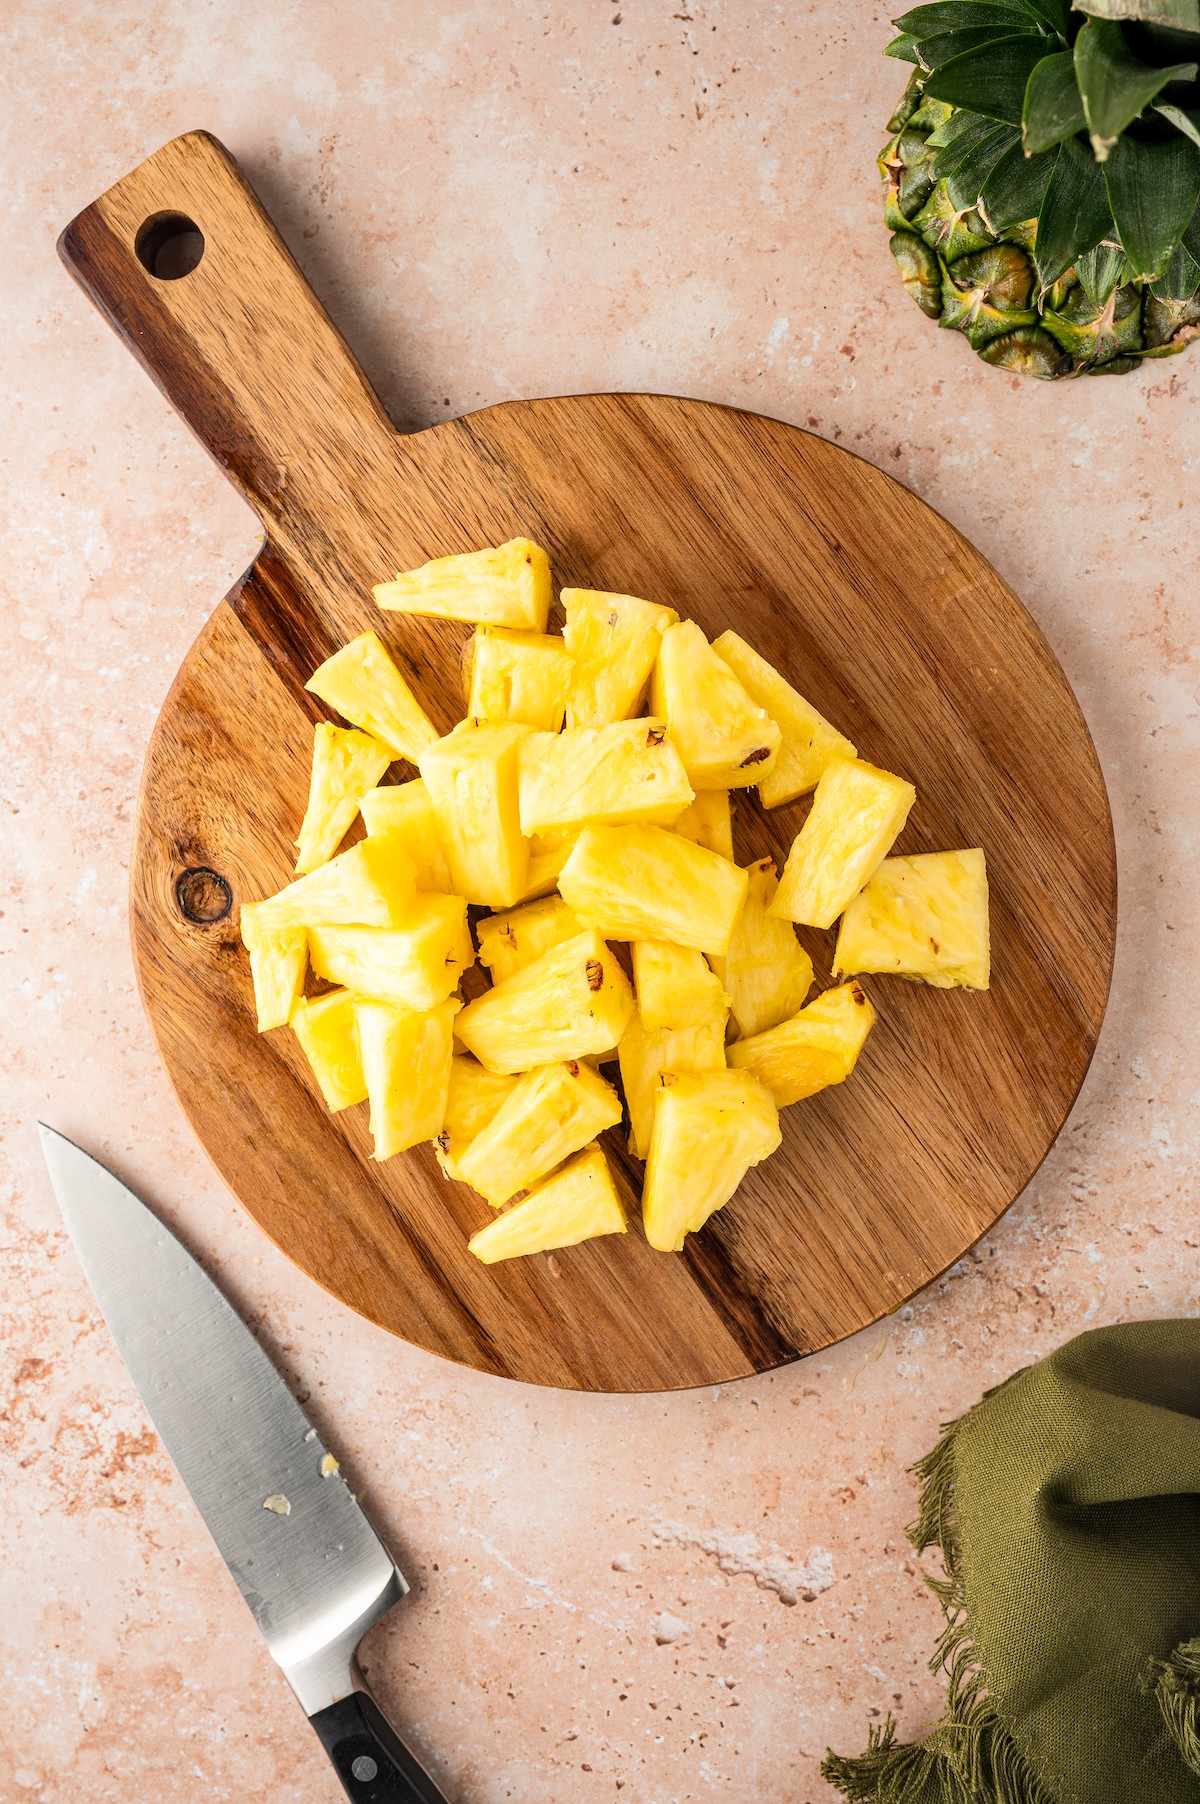 Pineapple chunks on a wooden board.